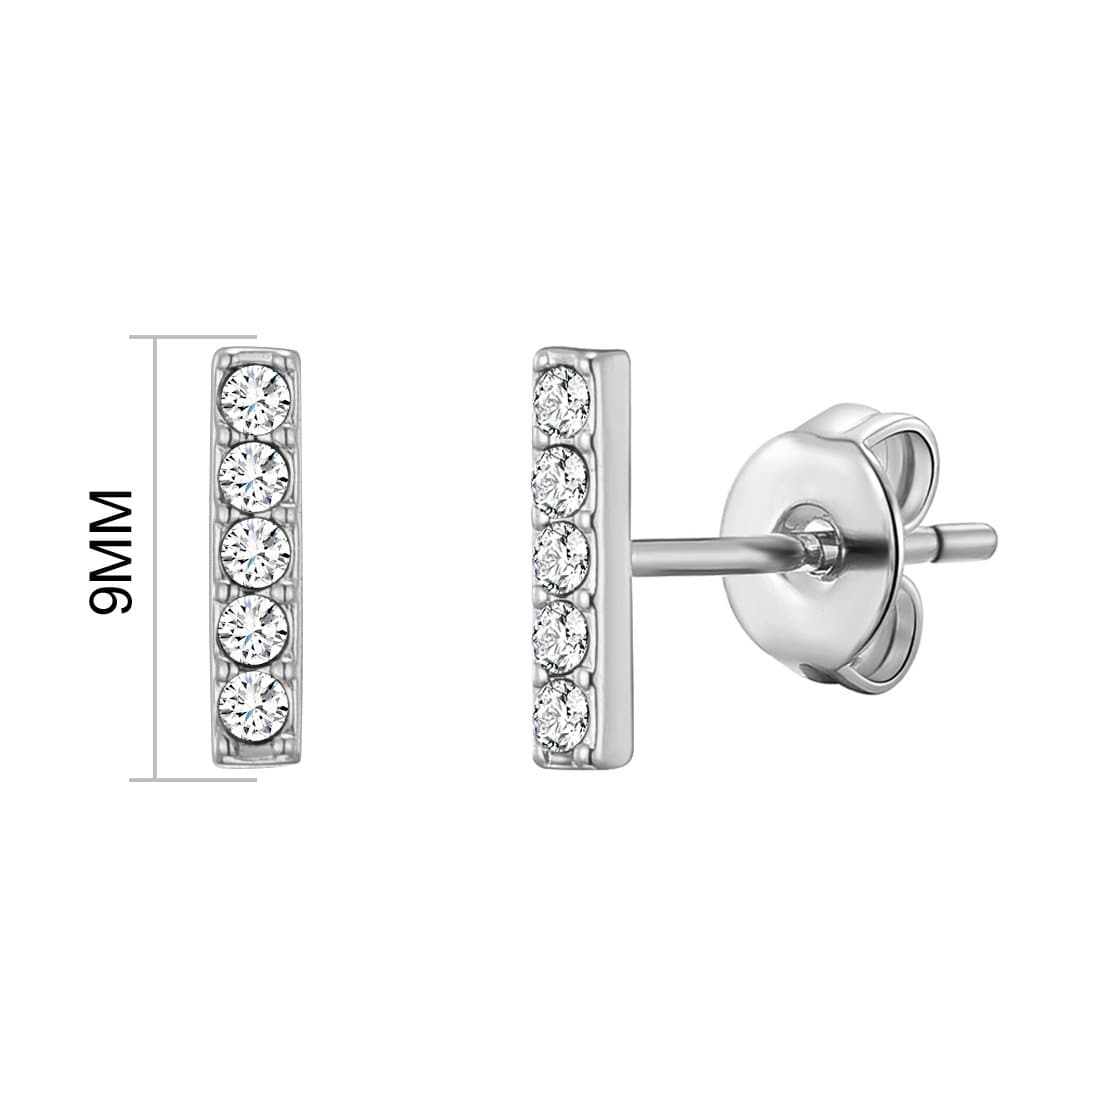 Silver Plated Bar Earrings Created with Zircondia® Crystals